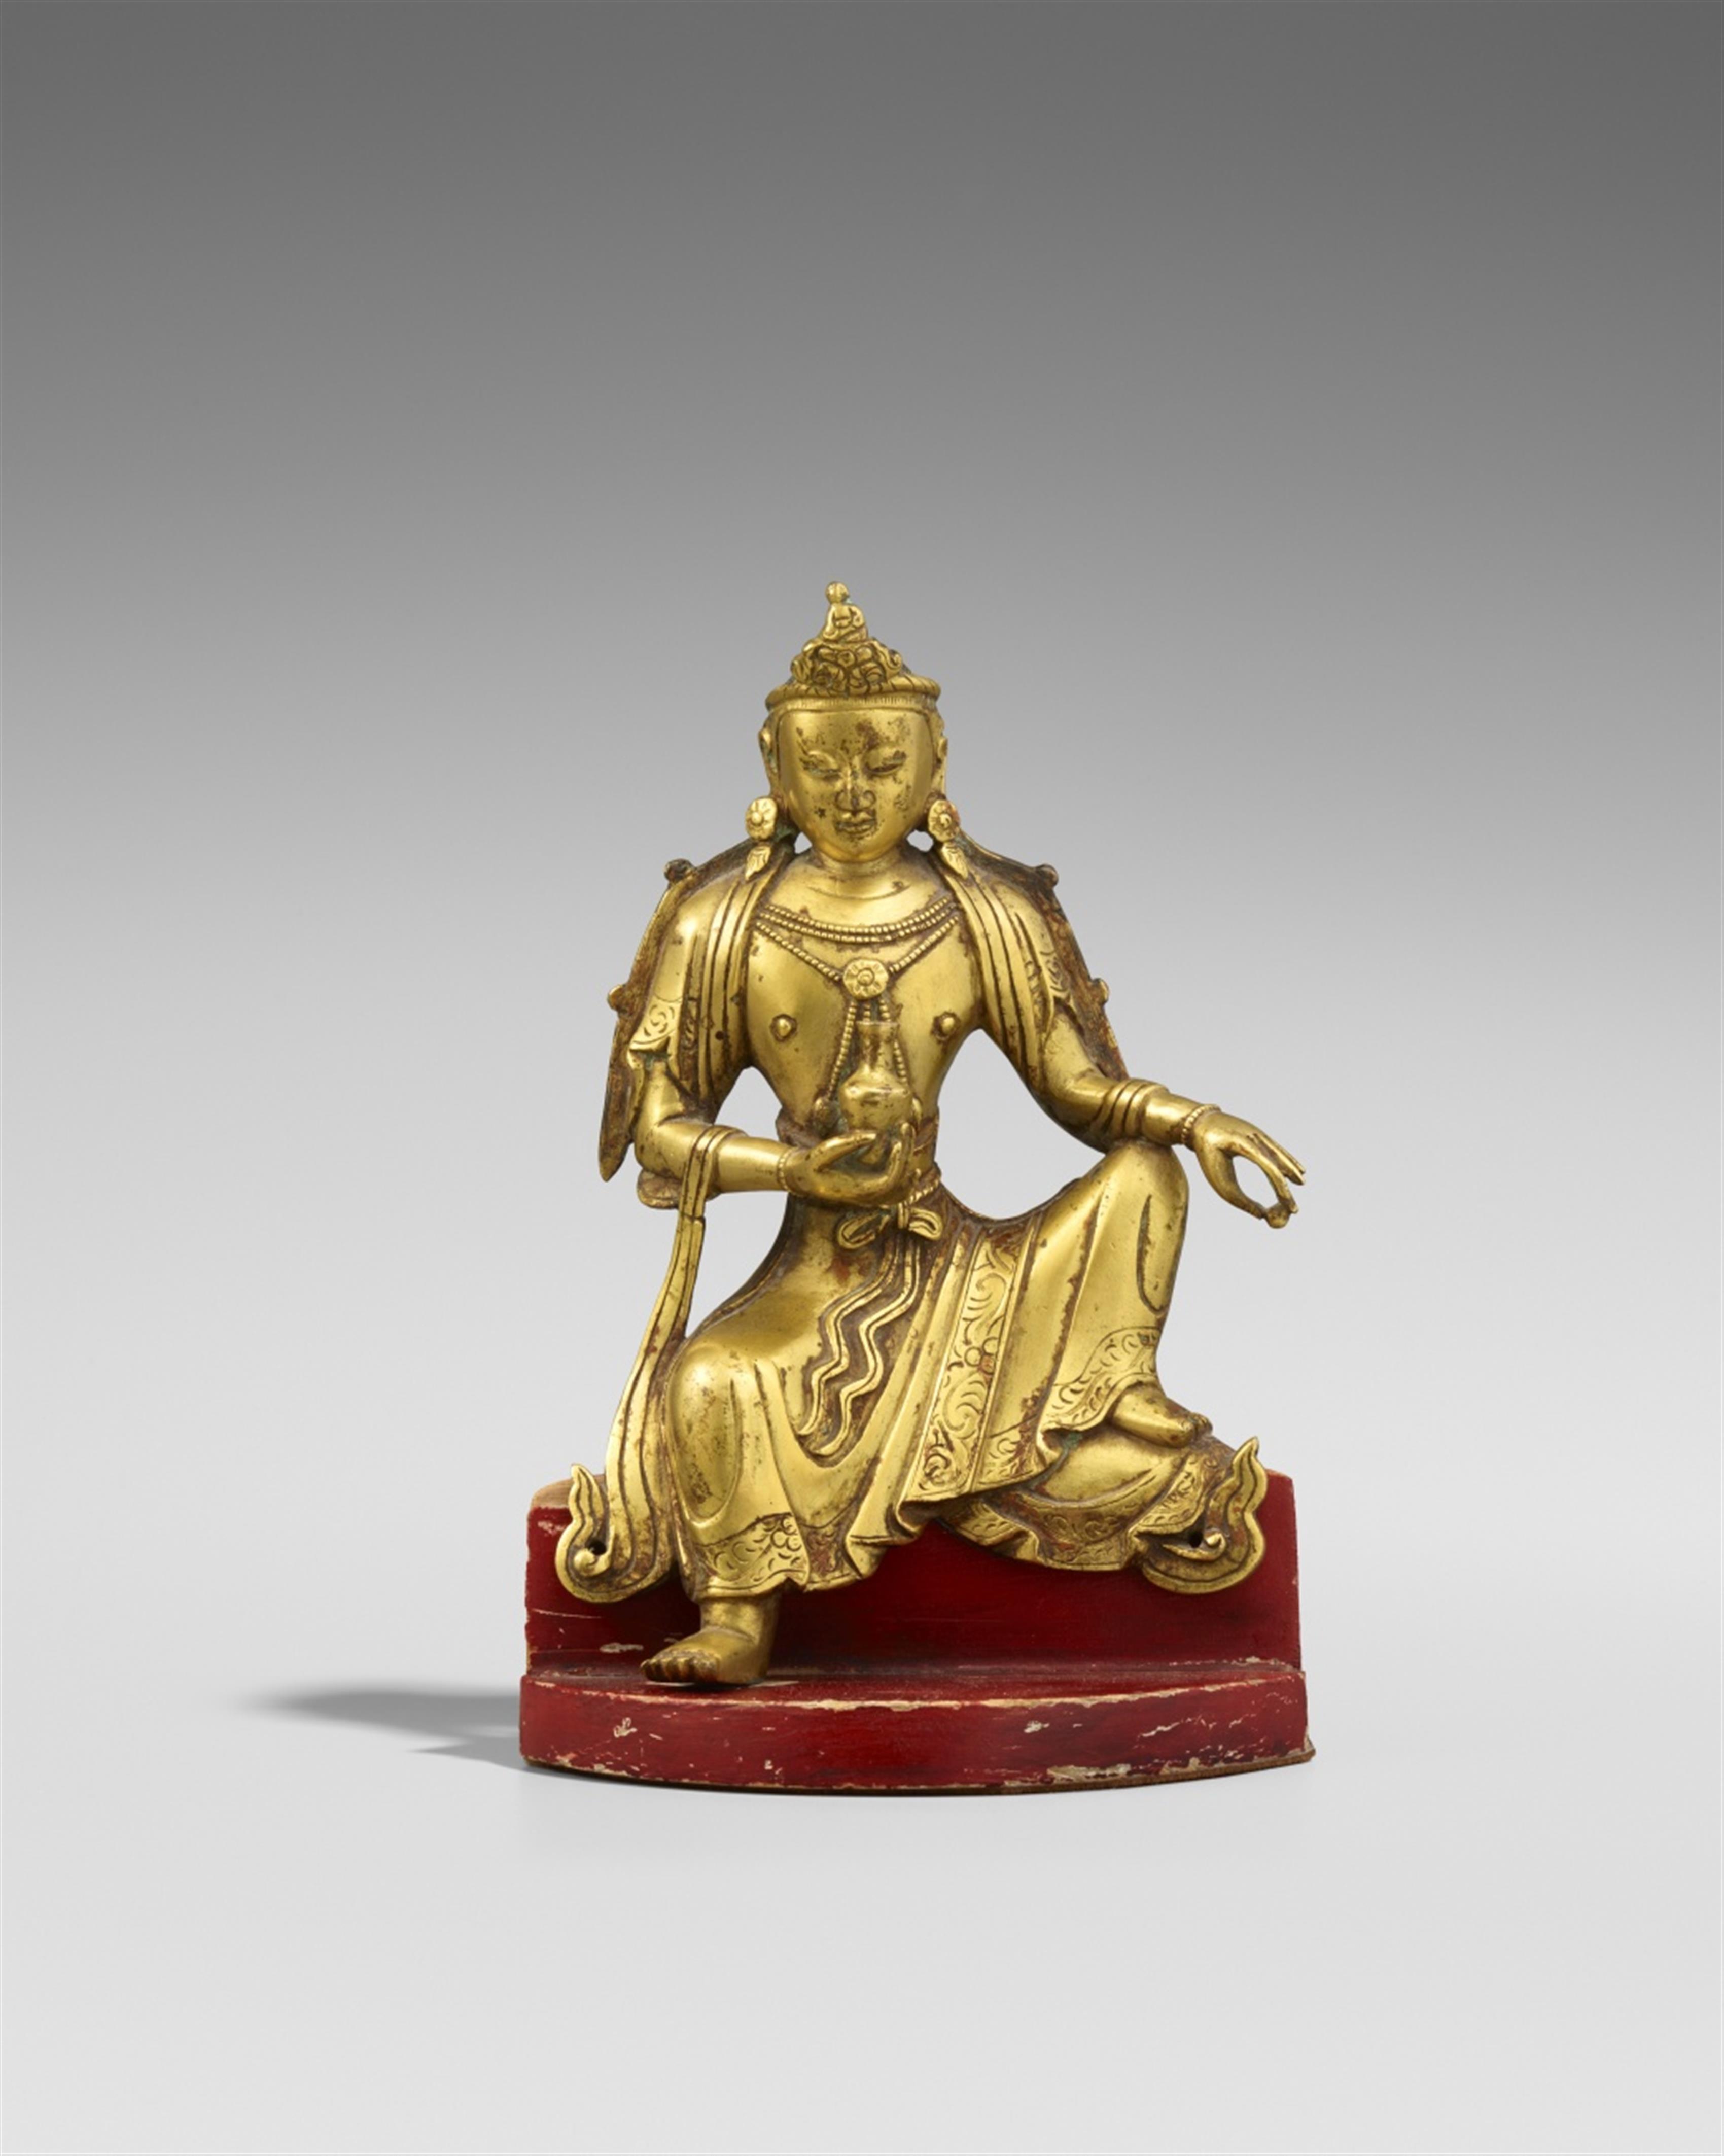 A gilt bronze figure of Guanyin. In the style of the 14th century, but probably 18th century - image-1